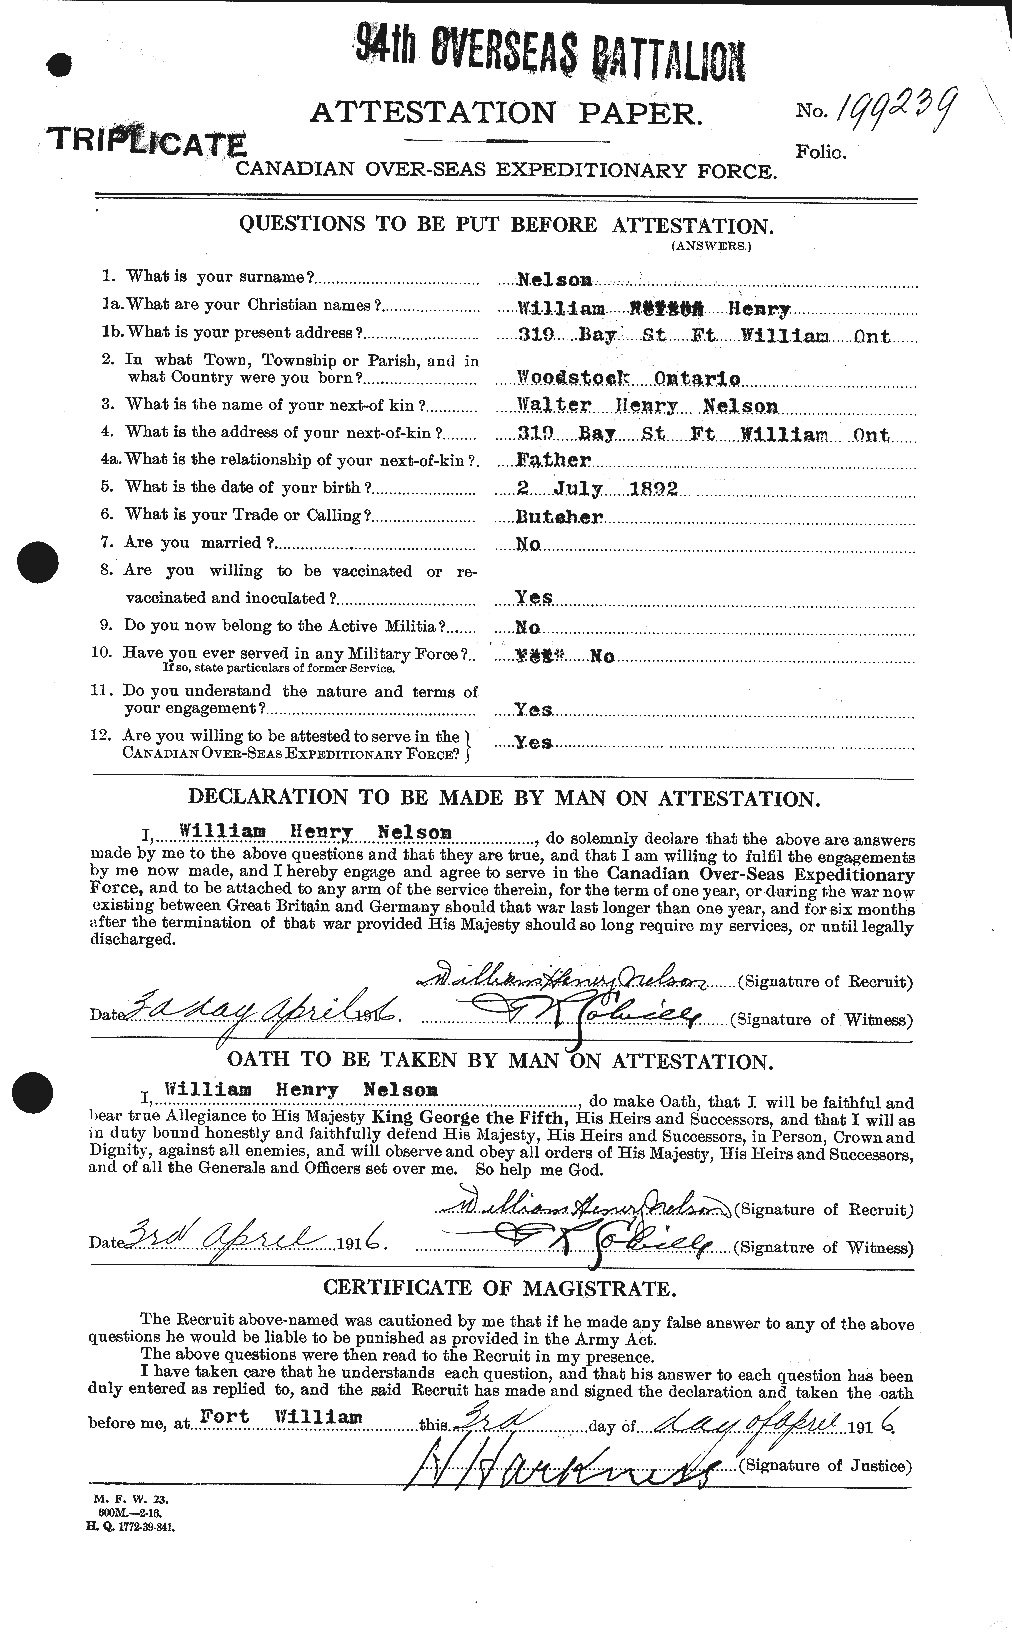 Personnel Records of the First World War - CEF 546629a